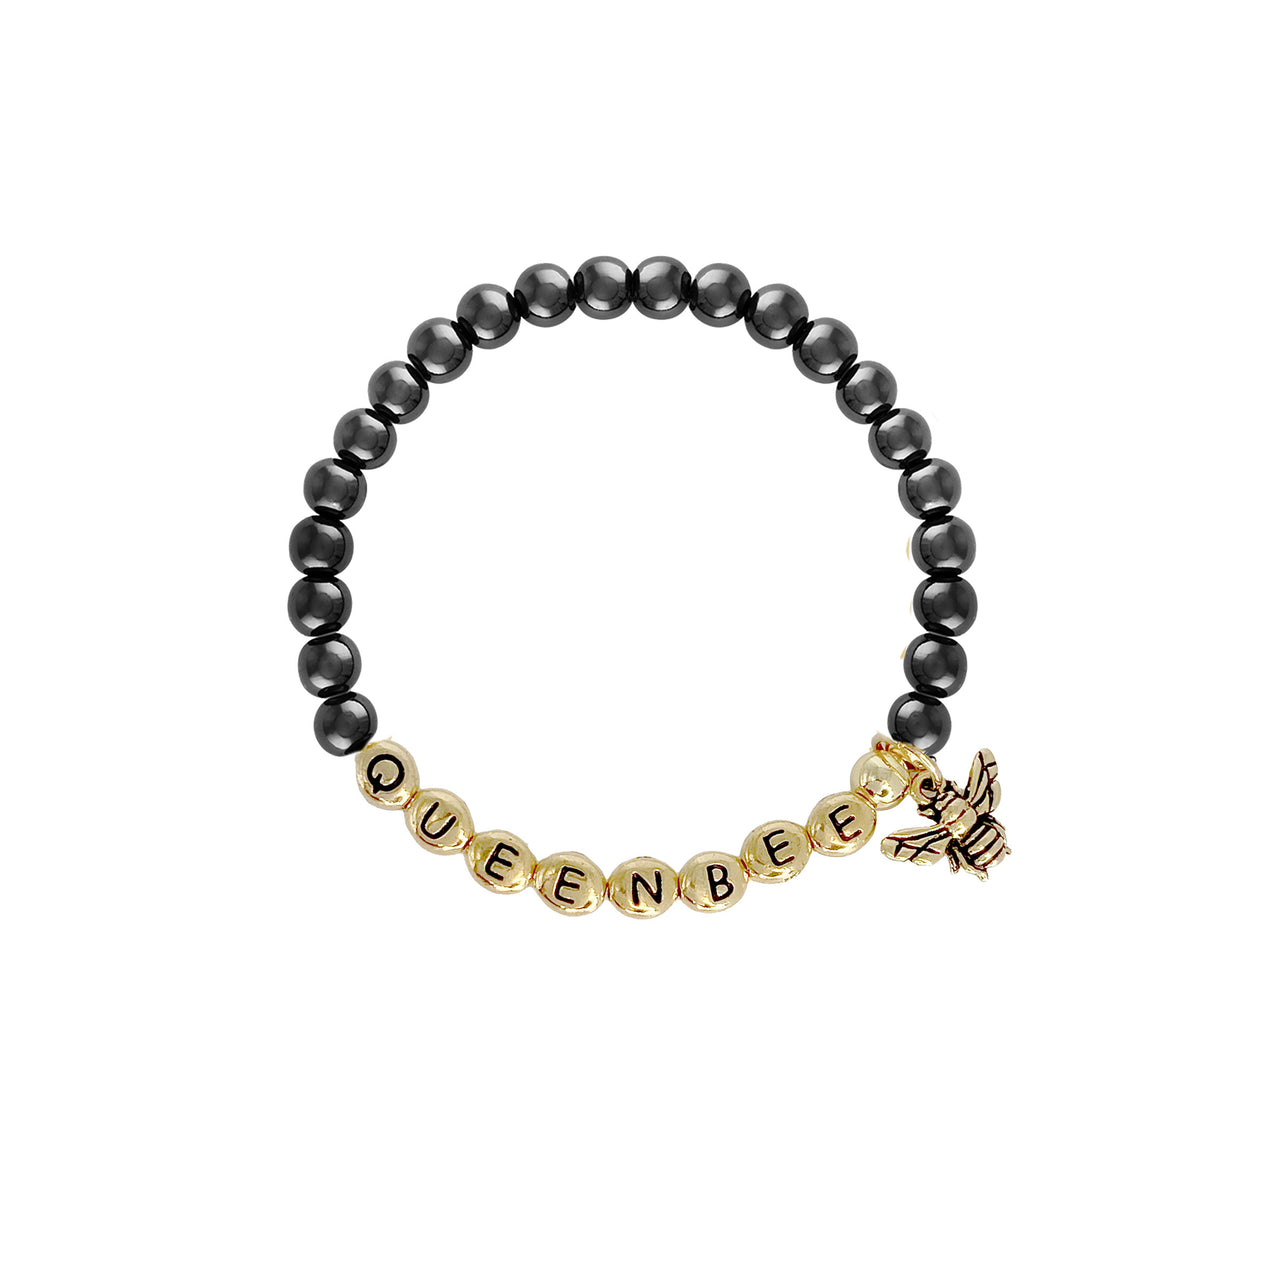 The All Time QUEEN BEE Beaded Bracelet